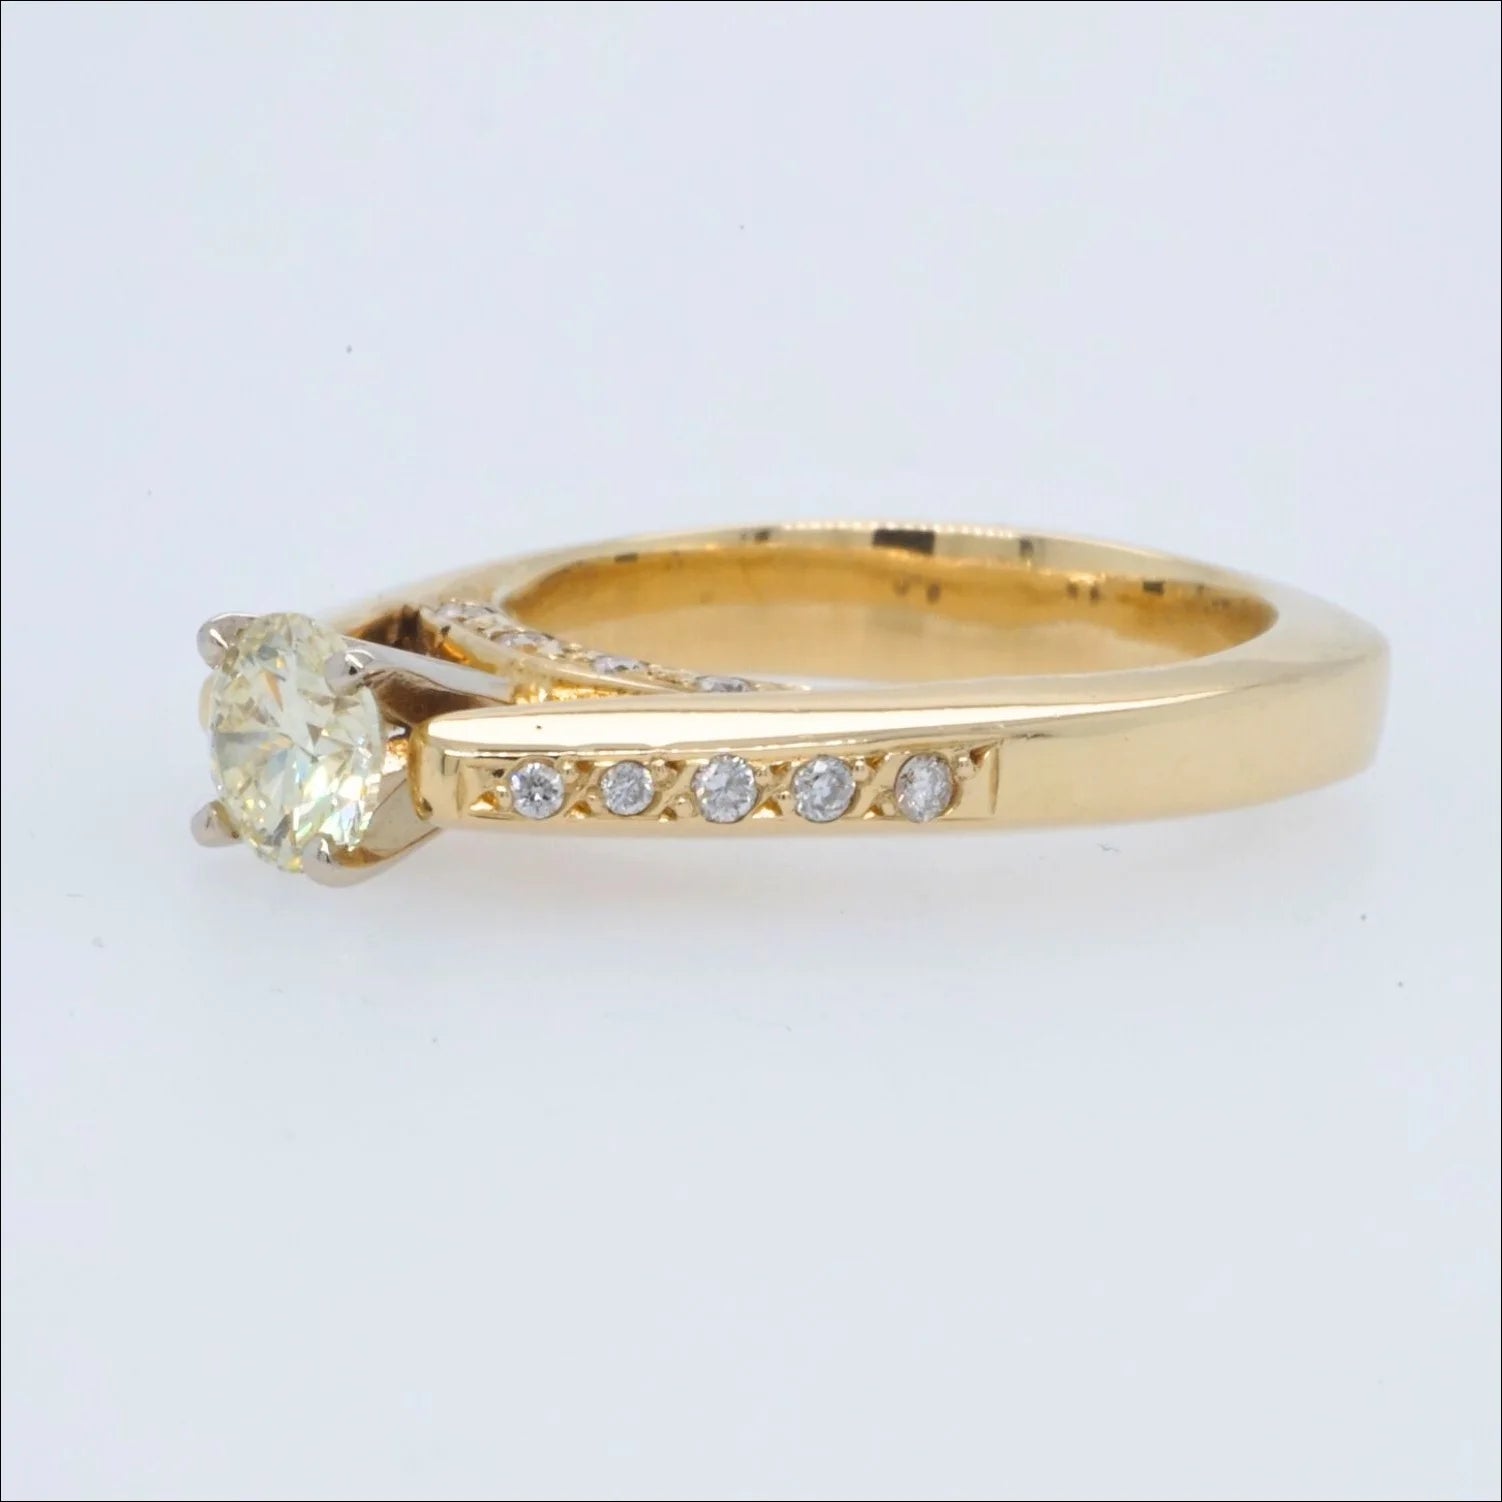 Eternal Love 18k Diamond Engagement Ring | Home page